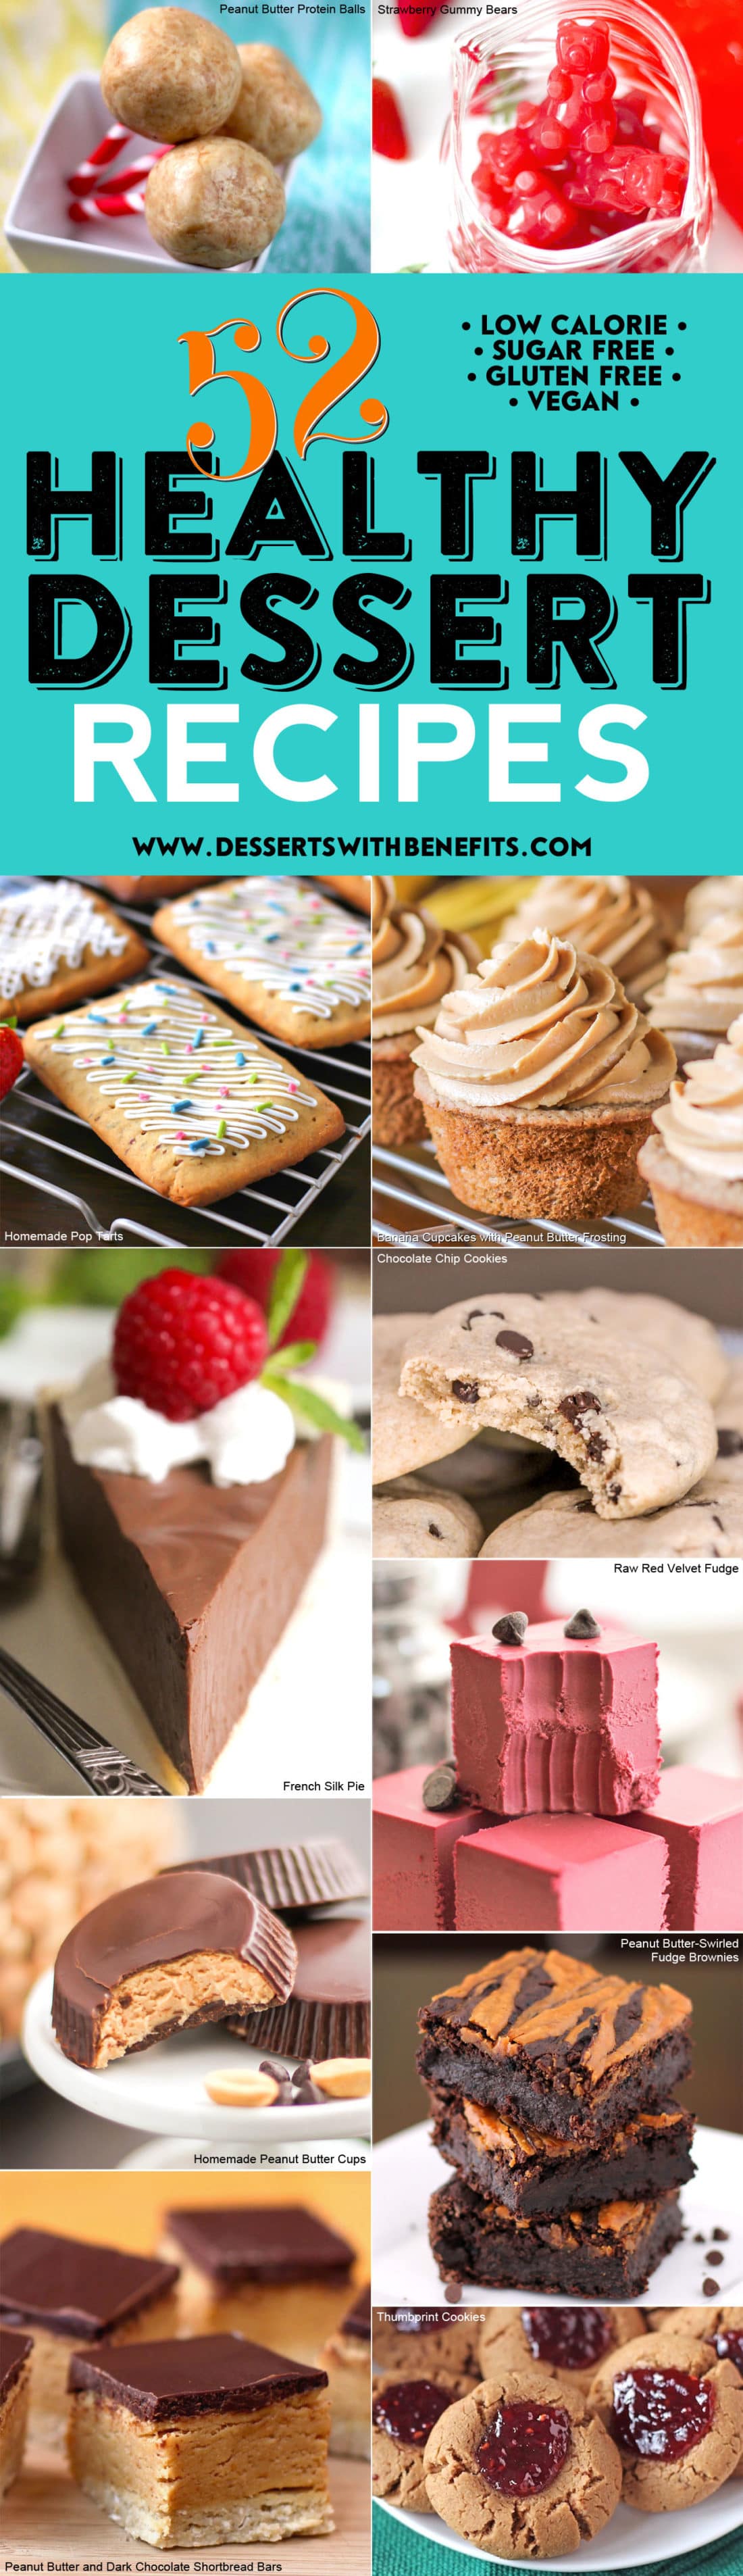 The best, most popular, and healthiest dessert recipes from the Desserts With Benefits Blog! These 52 healthy dessert recipes will keep you healthy and happy (not hangry) all year long - Healthy Dessert Recipes at Desserts with Benefits